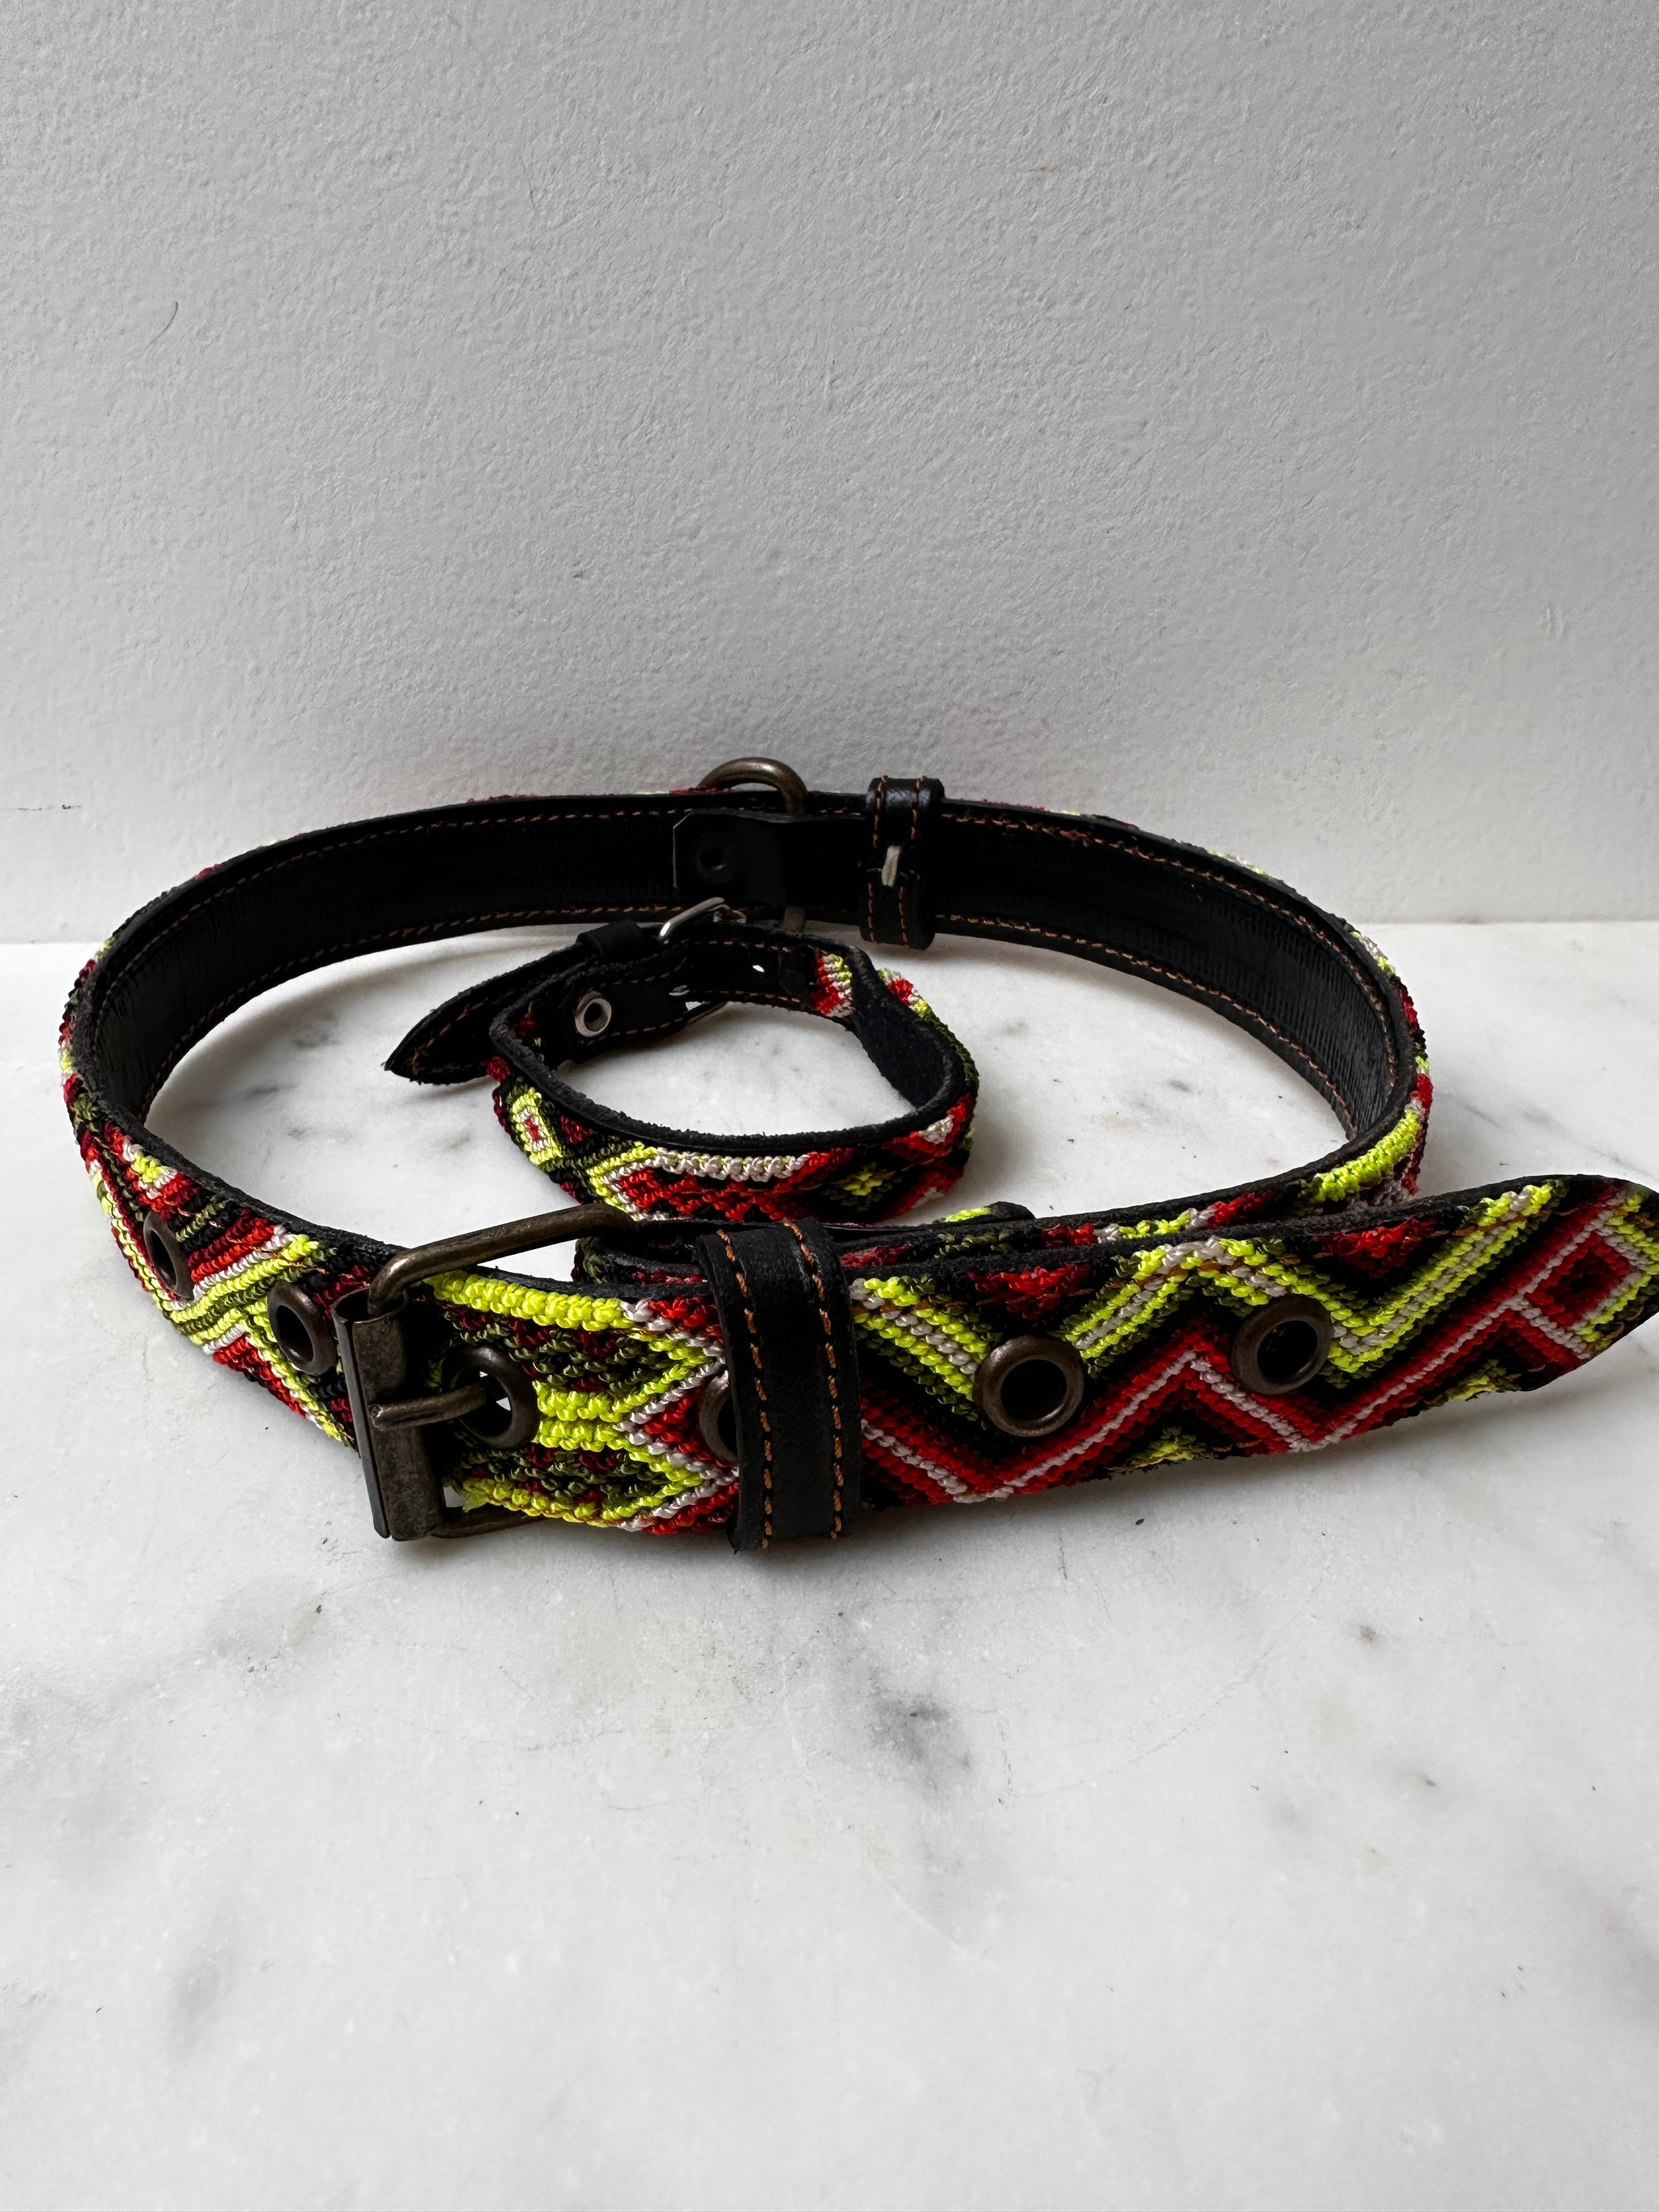 Future Nomads Homewares One Size Huichol Fully Embroidered Dog Collar L9